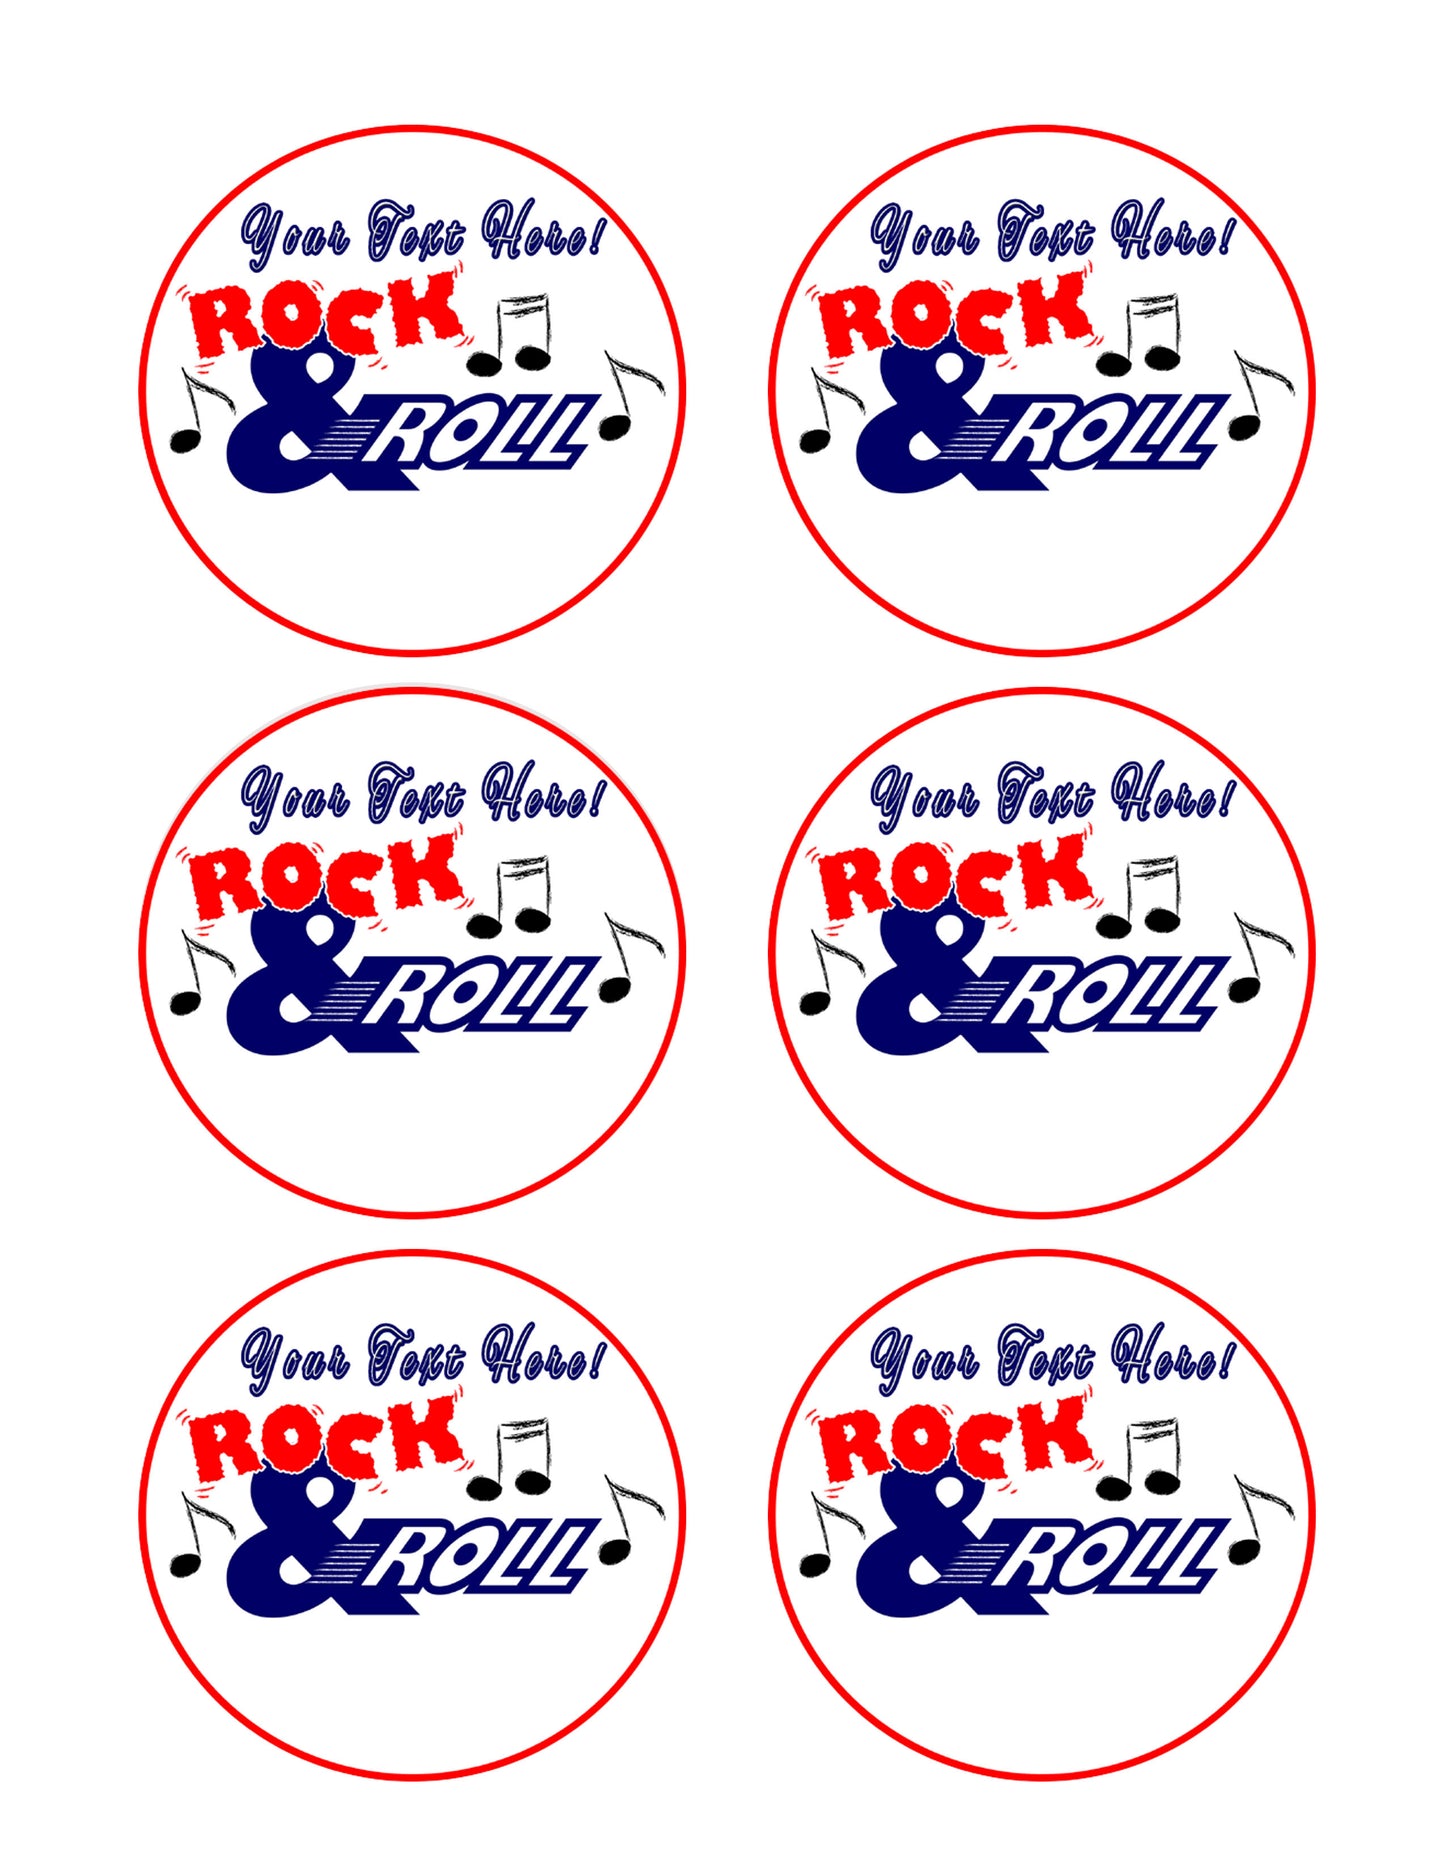 Rock & Roll - Edible Cake Topper, Cupcake Toppers, Strips